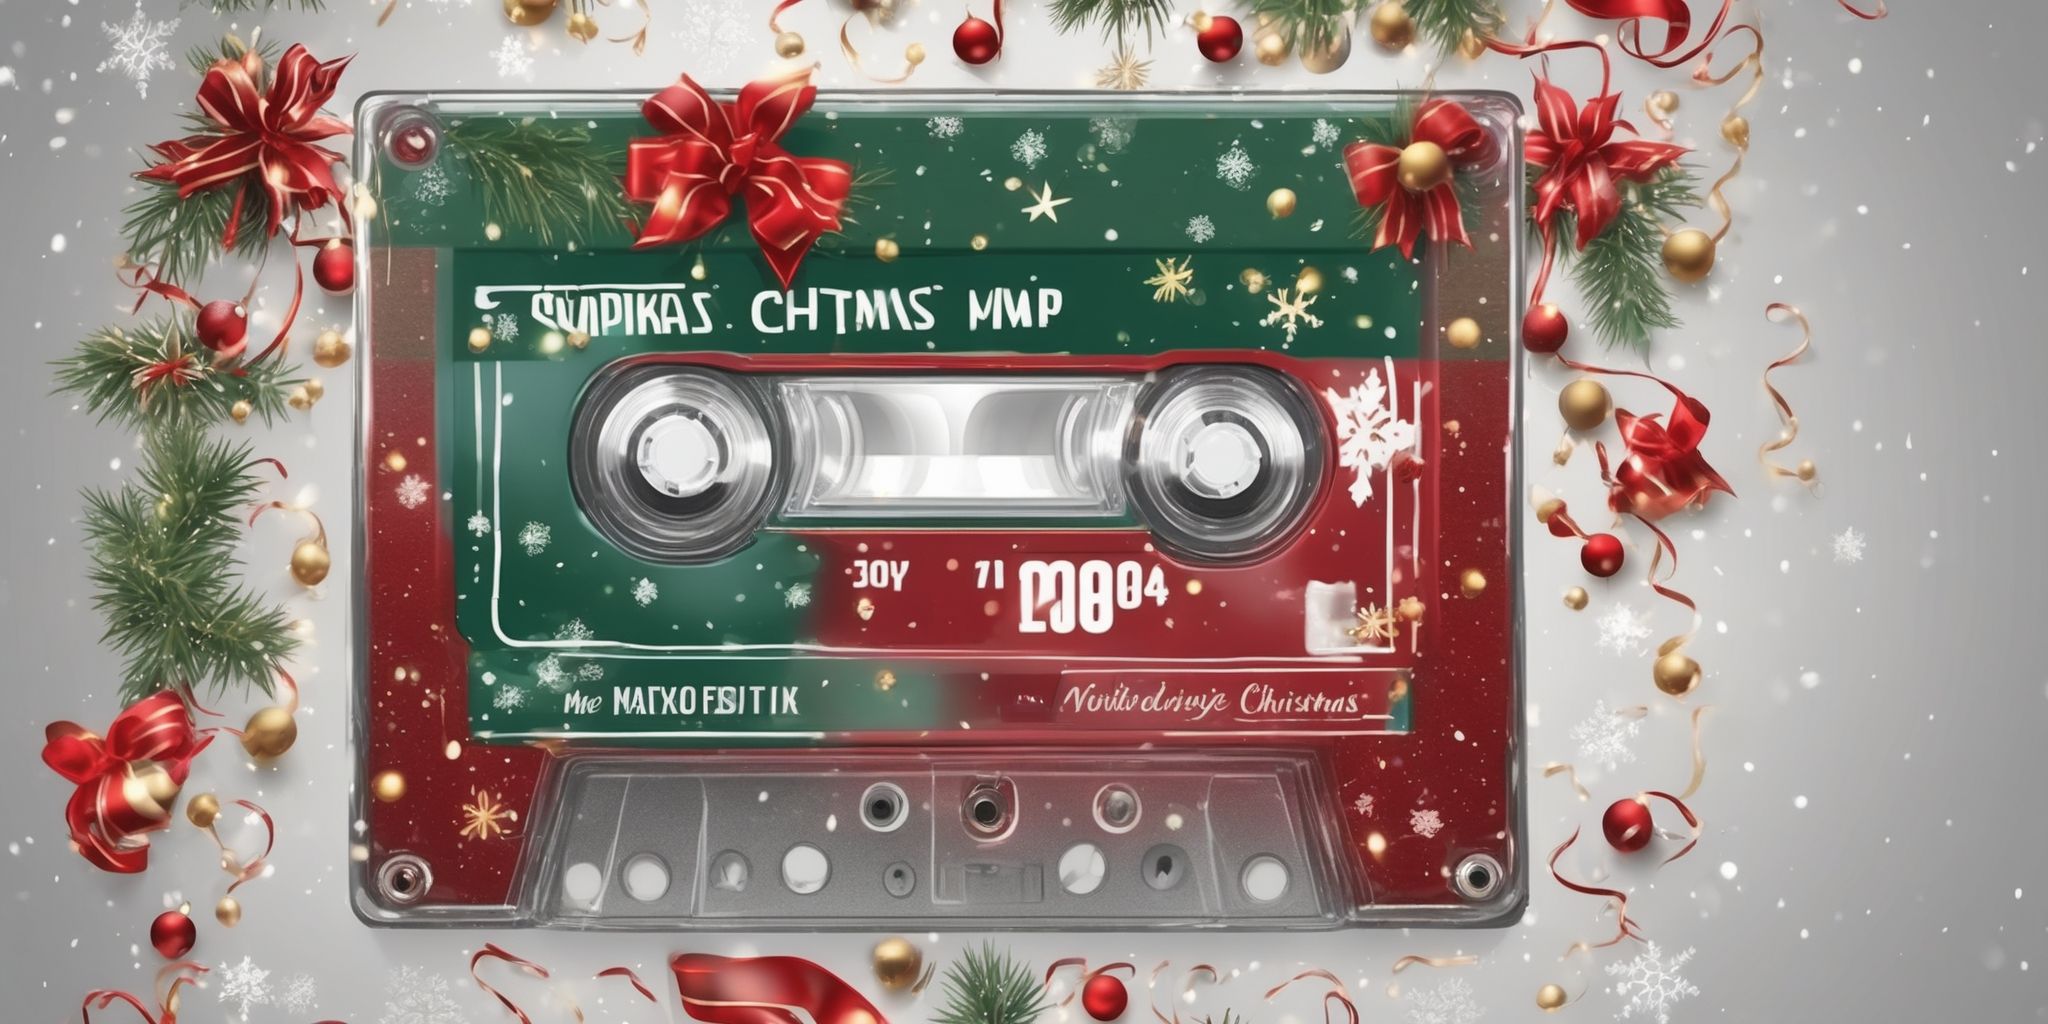 Mixtape in realistic Christmas style